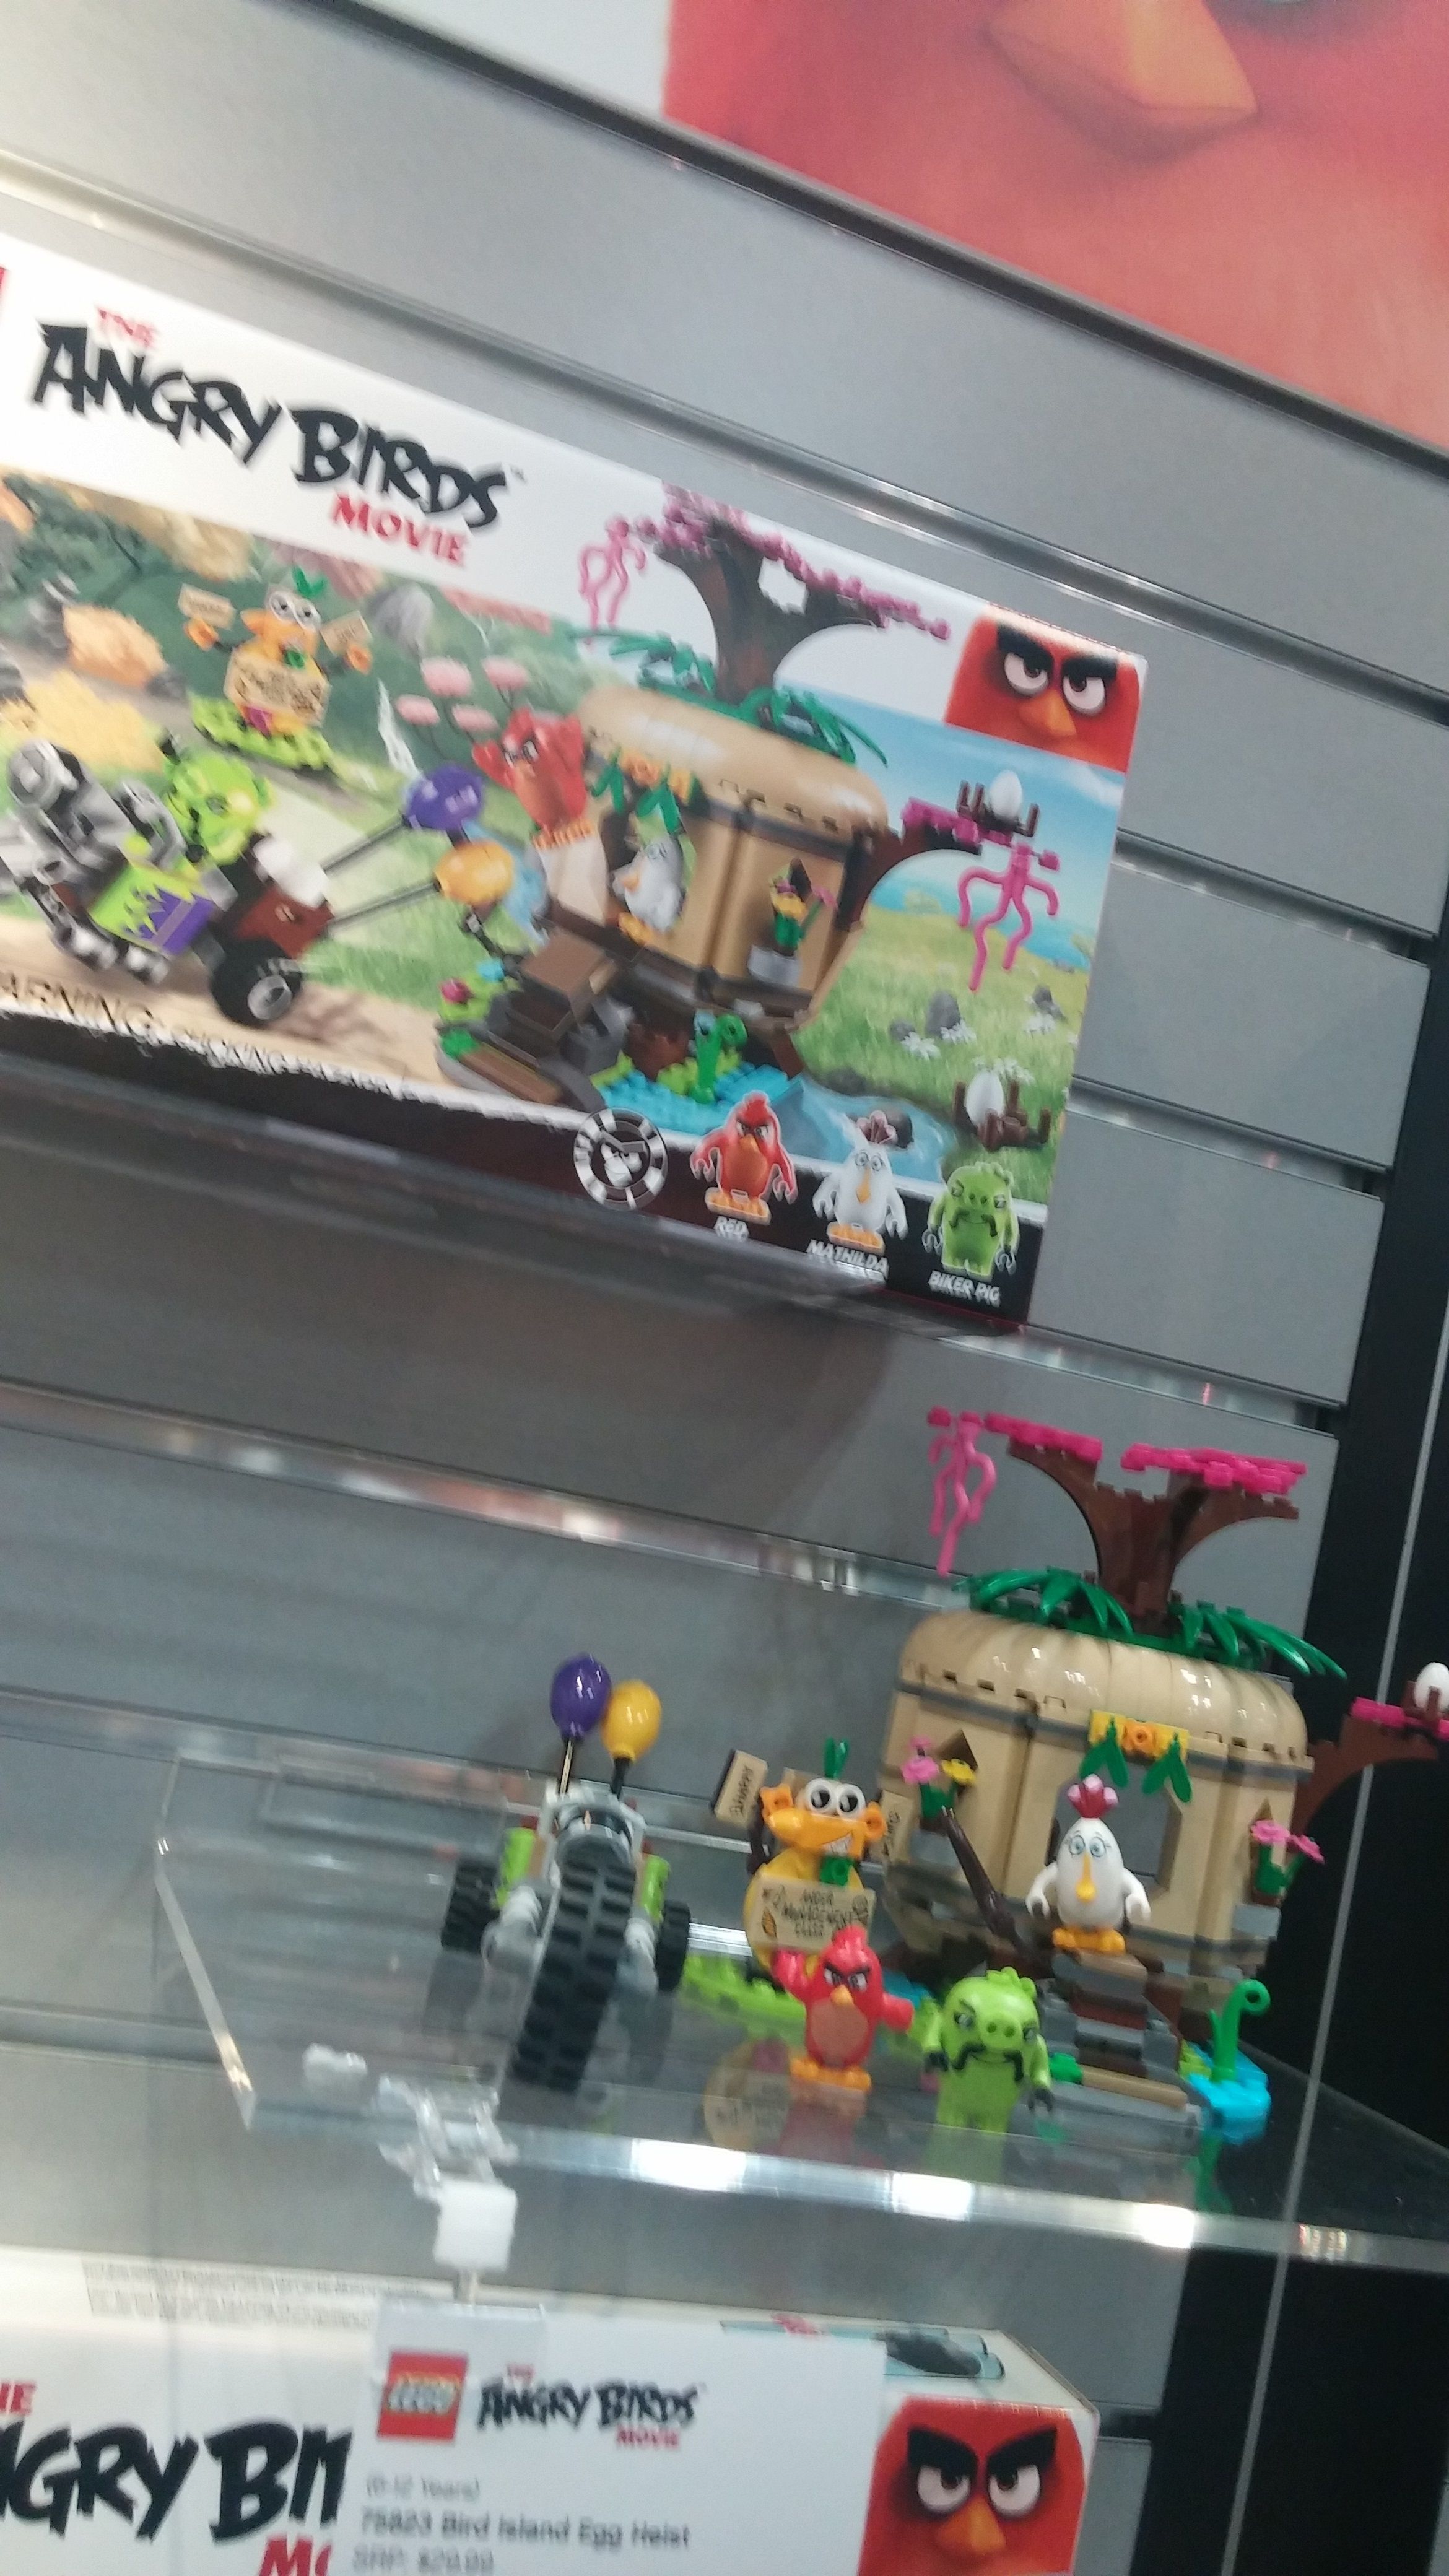 A look at the box art and display set for one of the new Angry Birds LEGO toys.